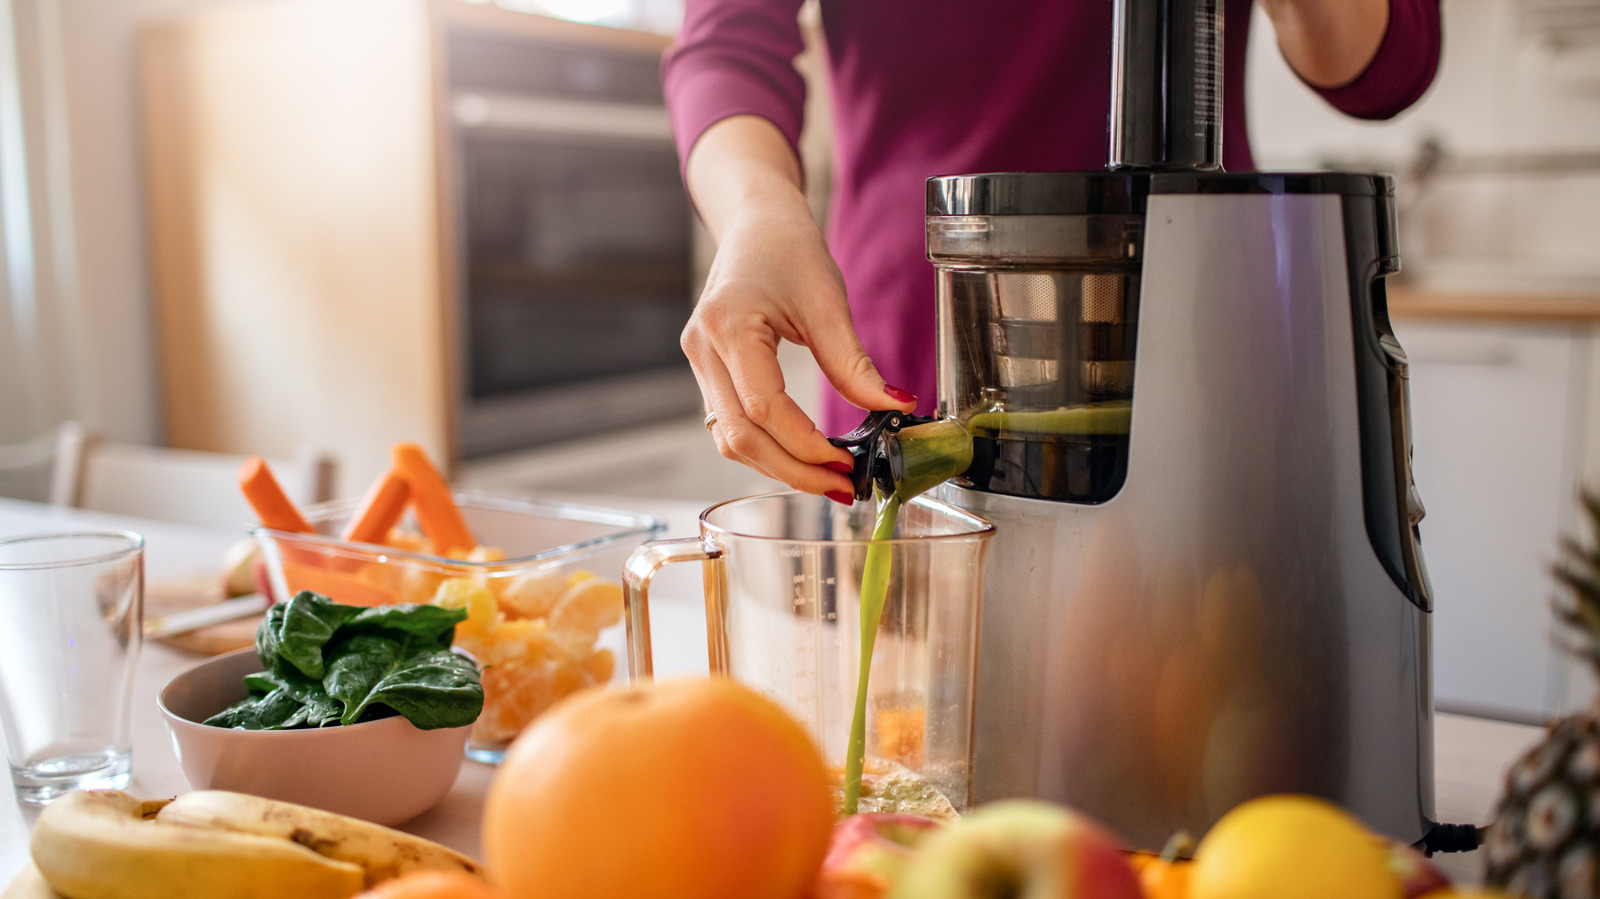 How To Clean A Juicer And Avoid Endless Scrubbing – The Daily Meal